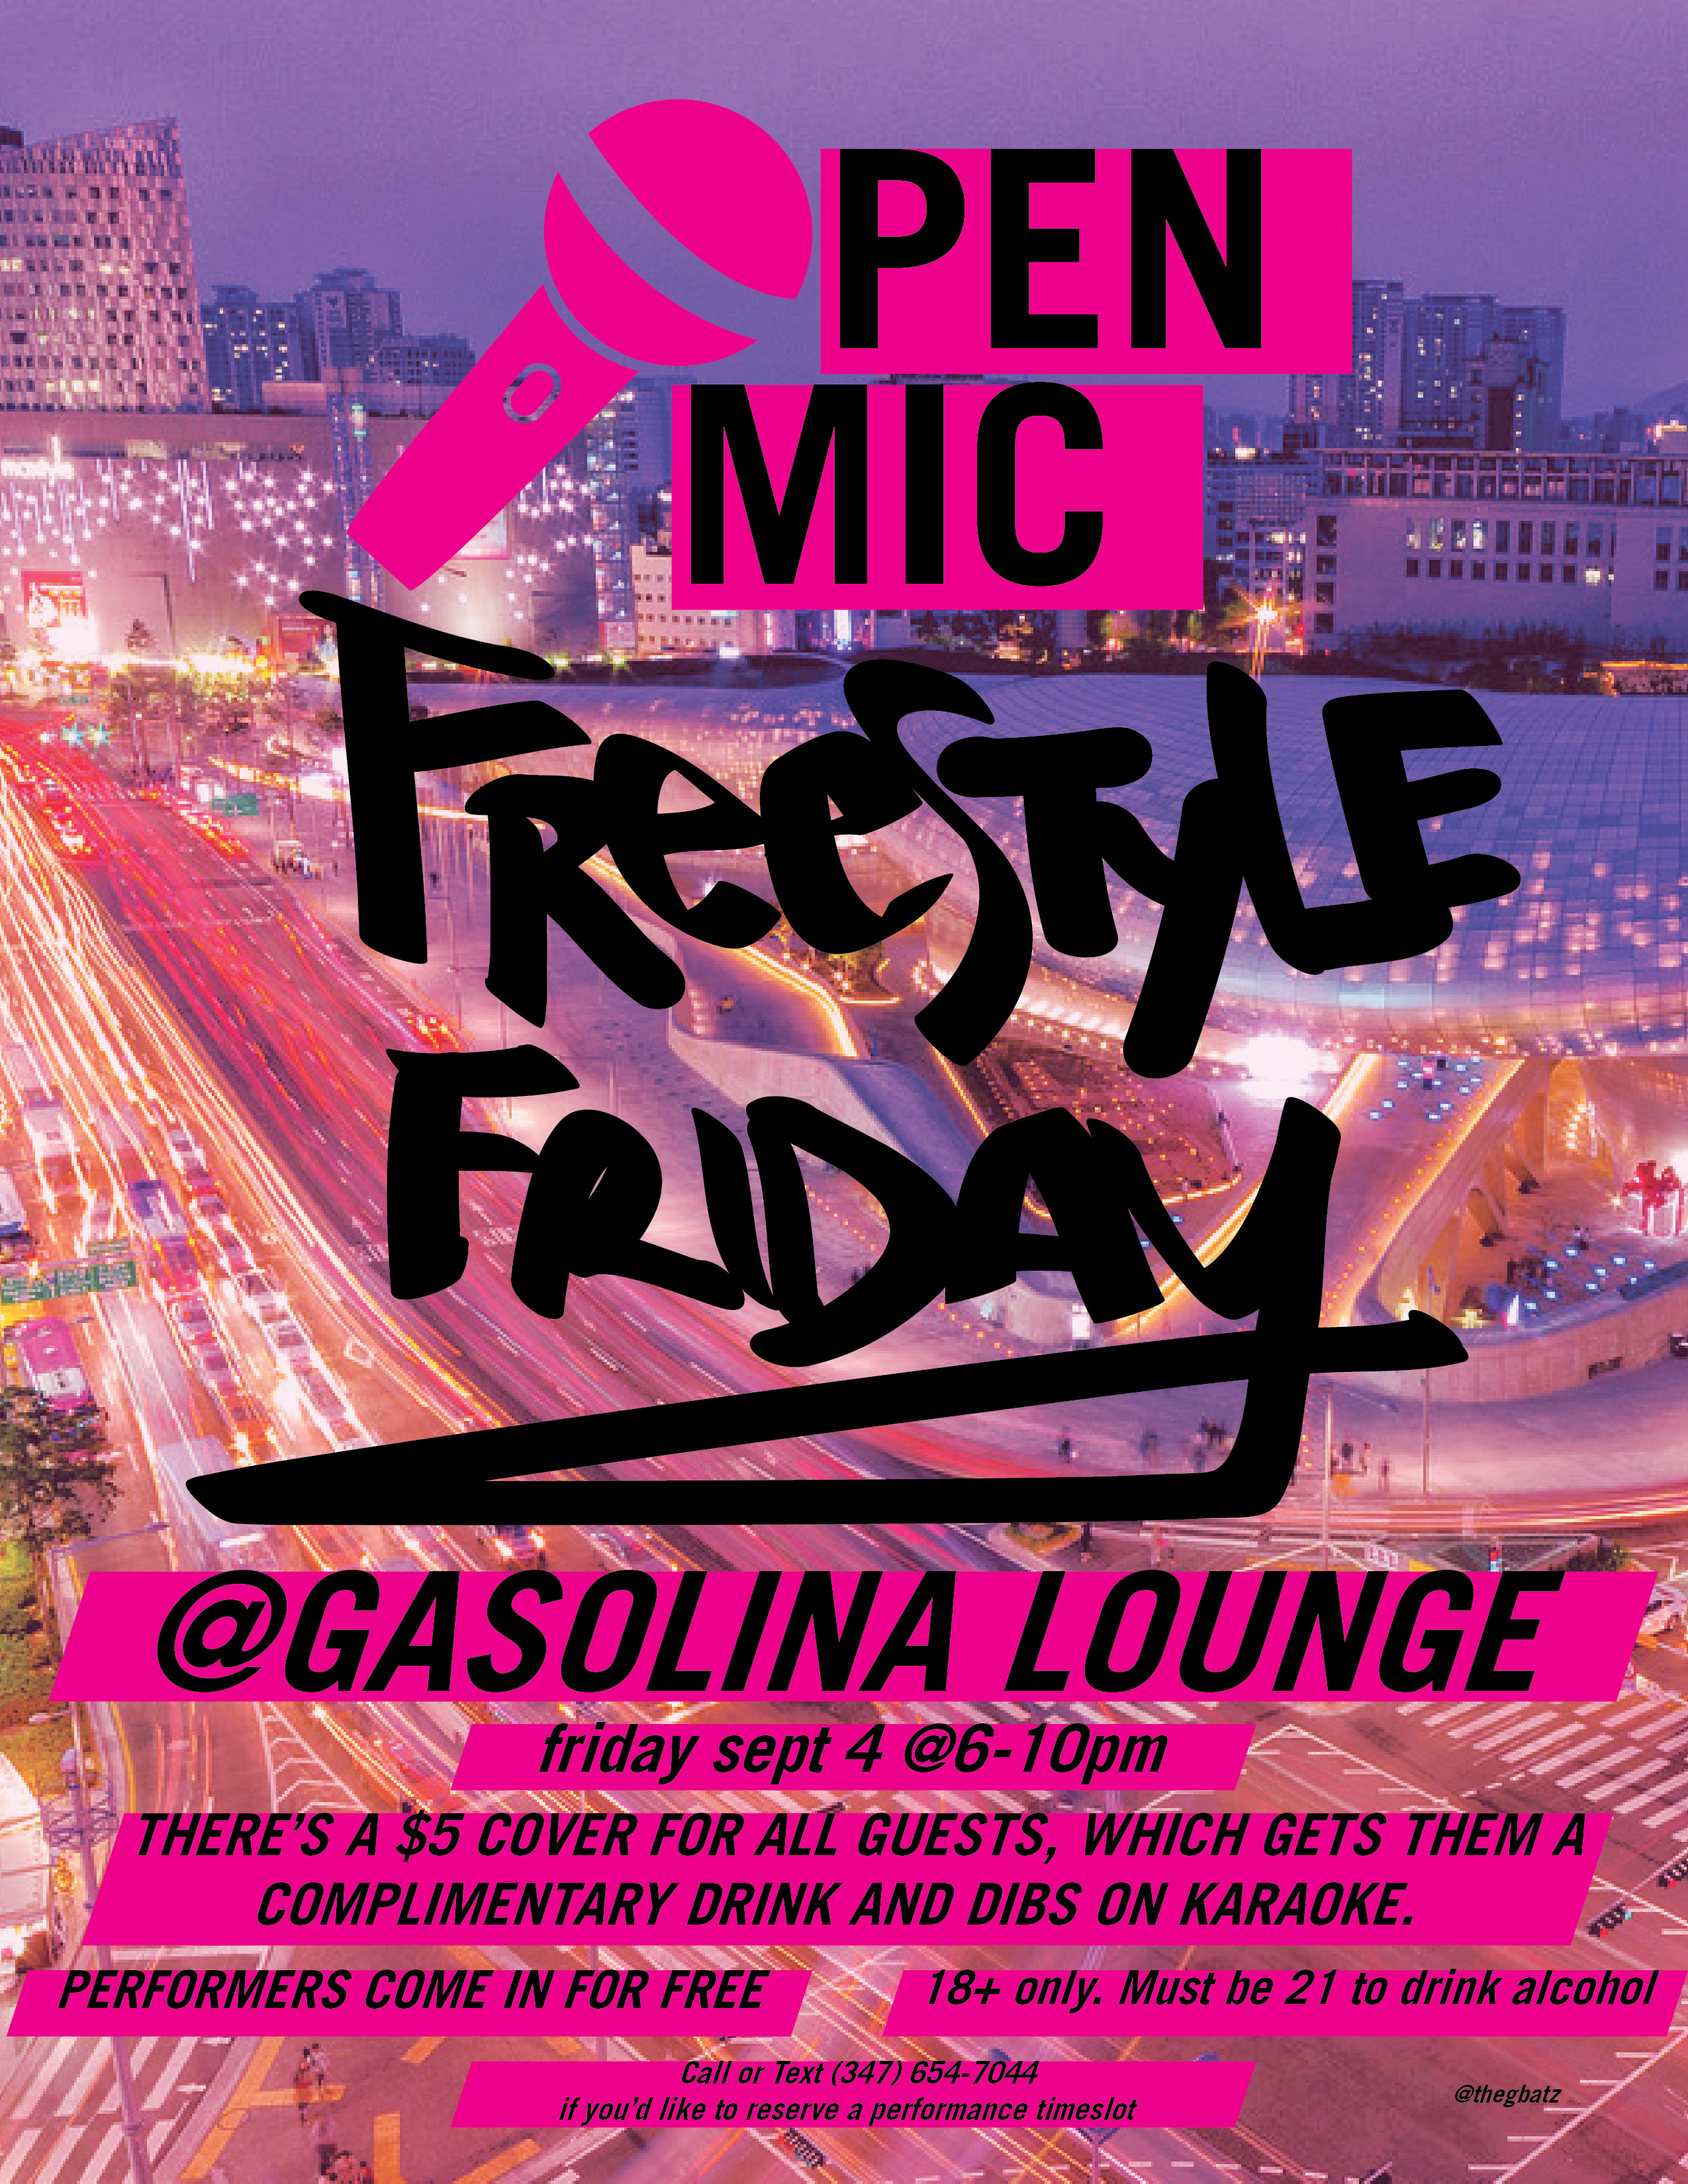 Flyer for Social Media - Open Mic Freestyle Friday at Gasolina